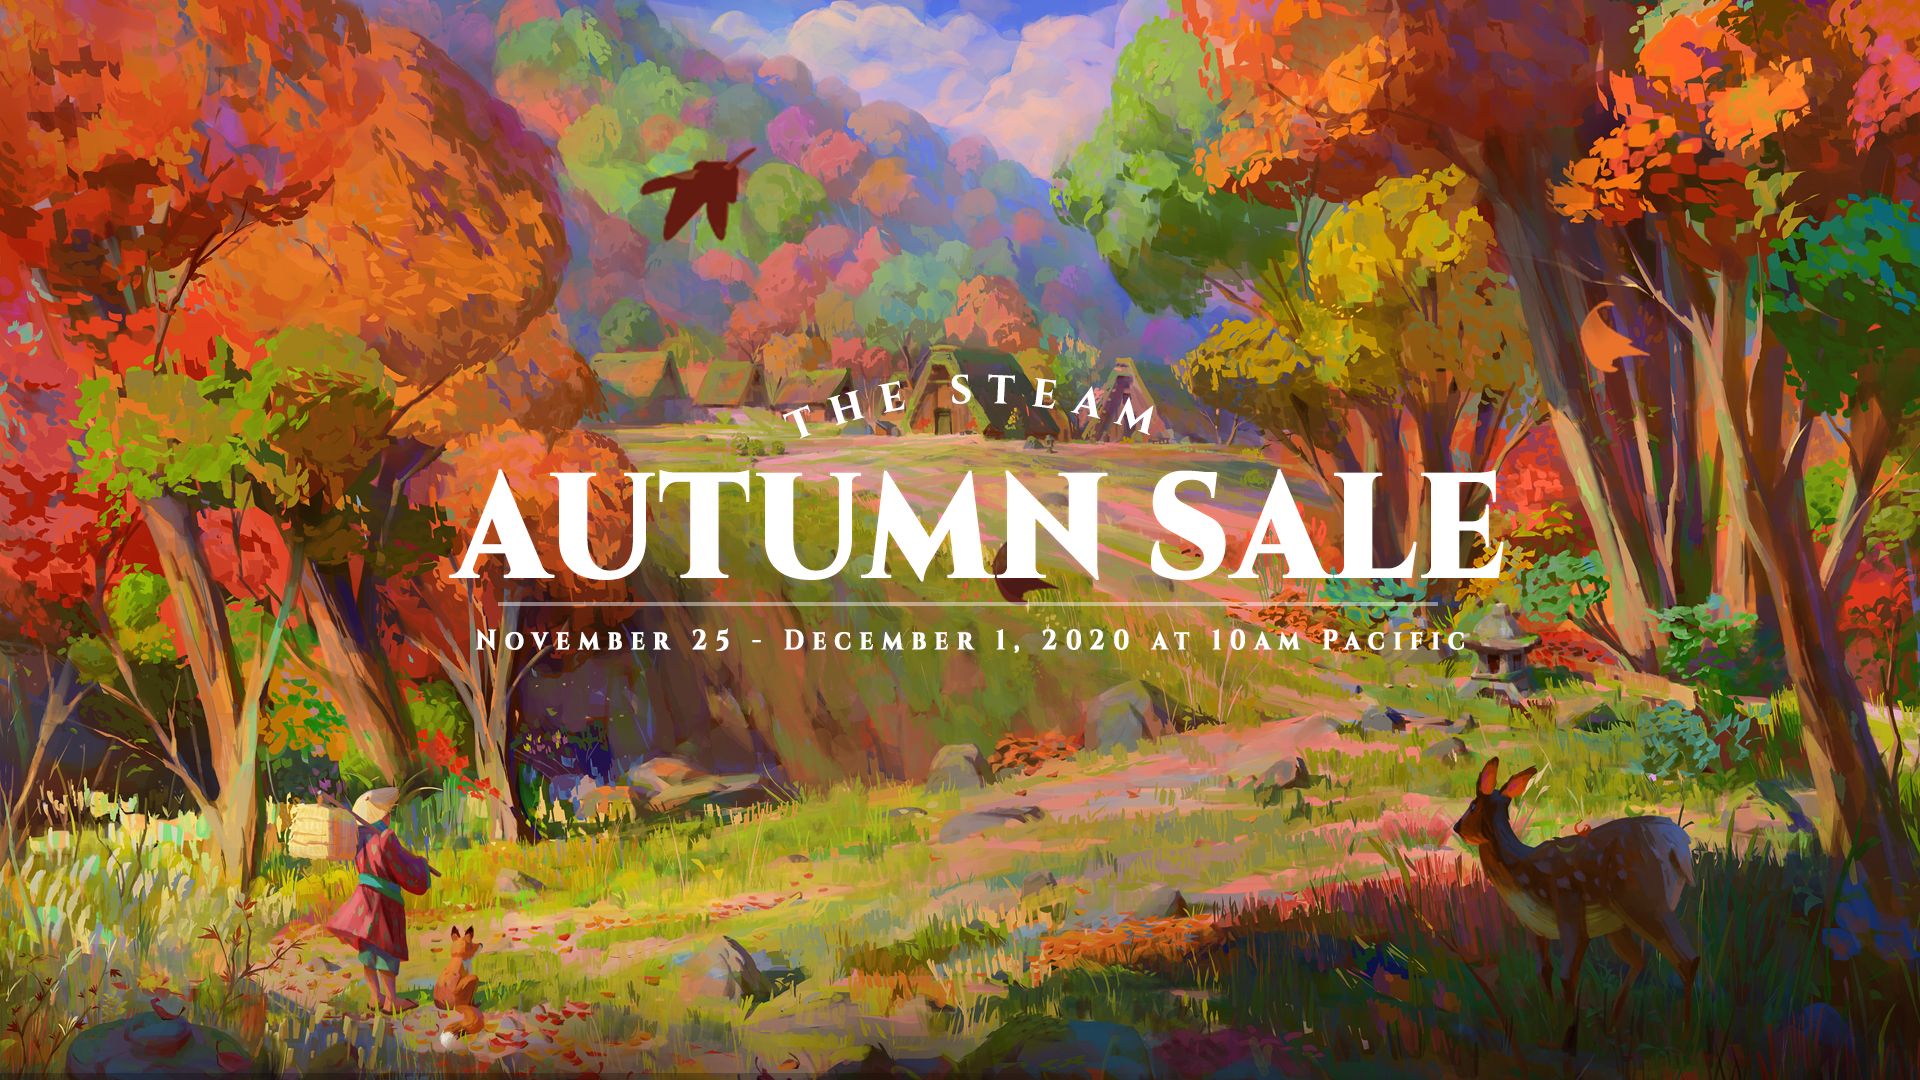 Steam Autumn Sale 2020 is back with great deals